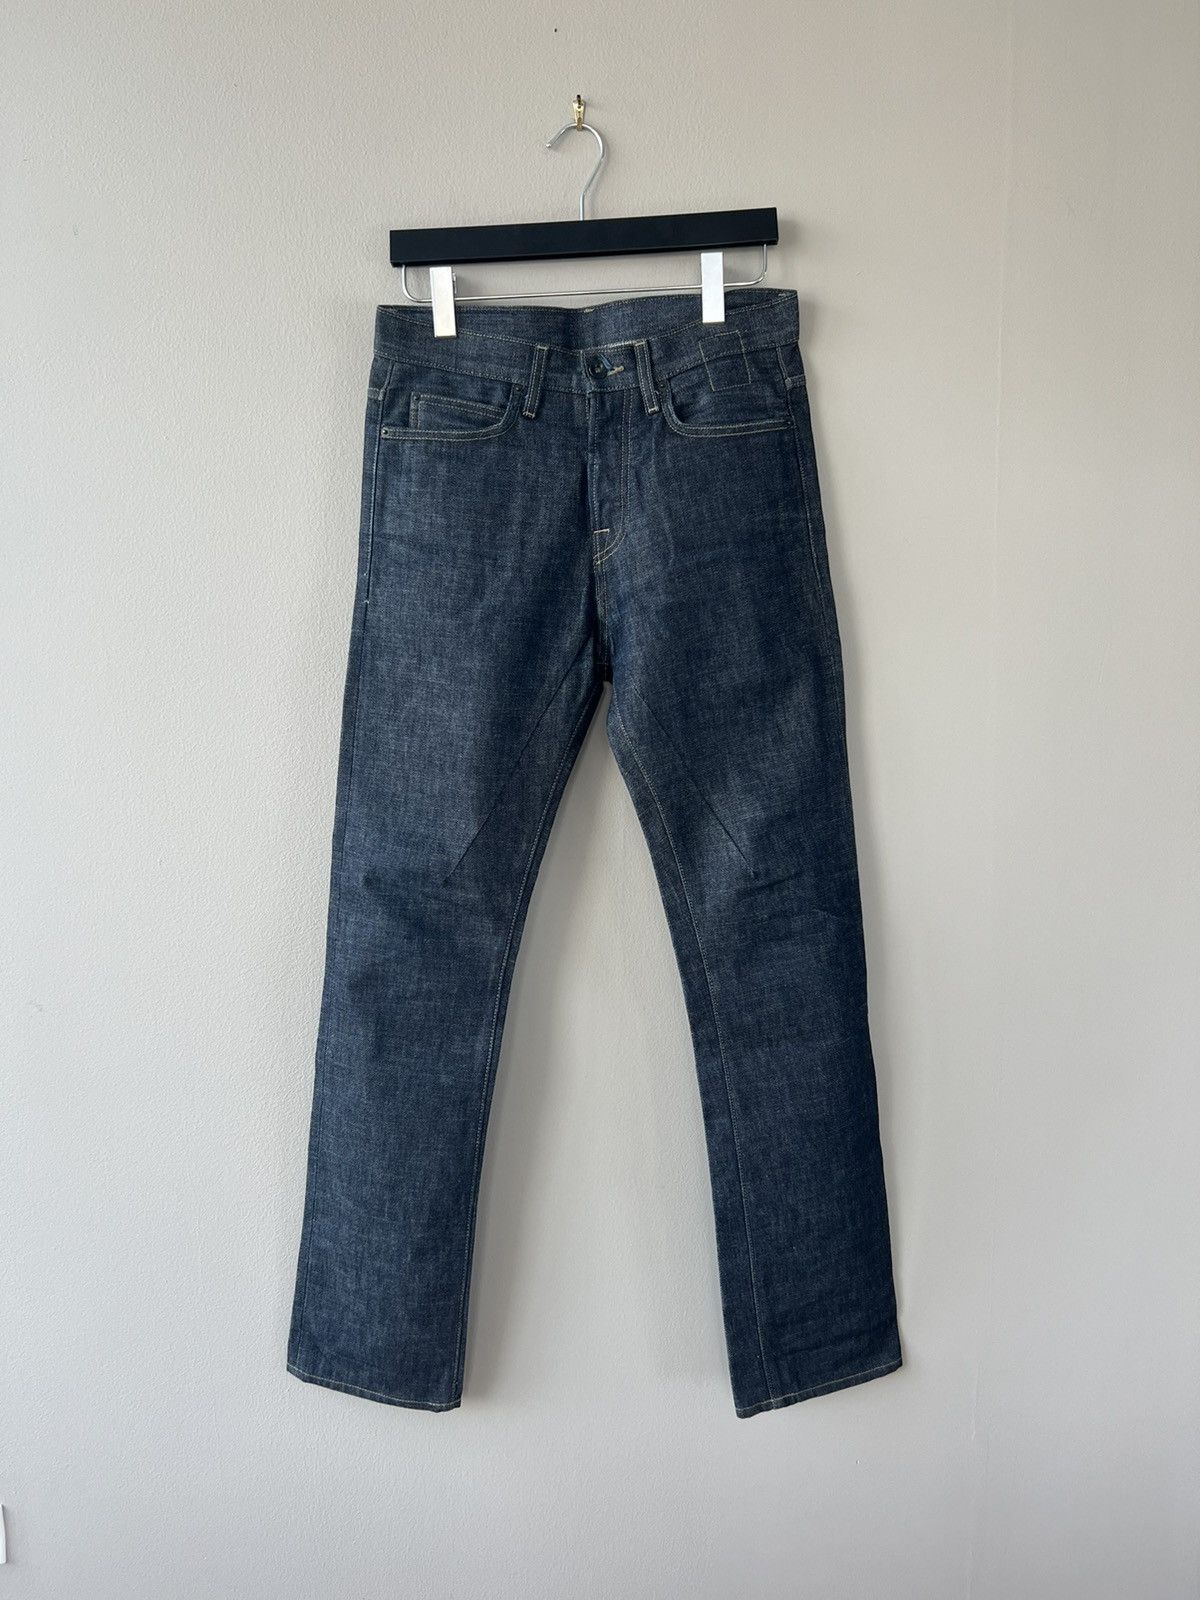 Selvedge Torrence Cut Made in Los Angeles Denim - 1